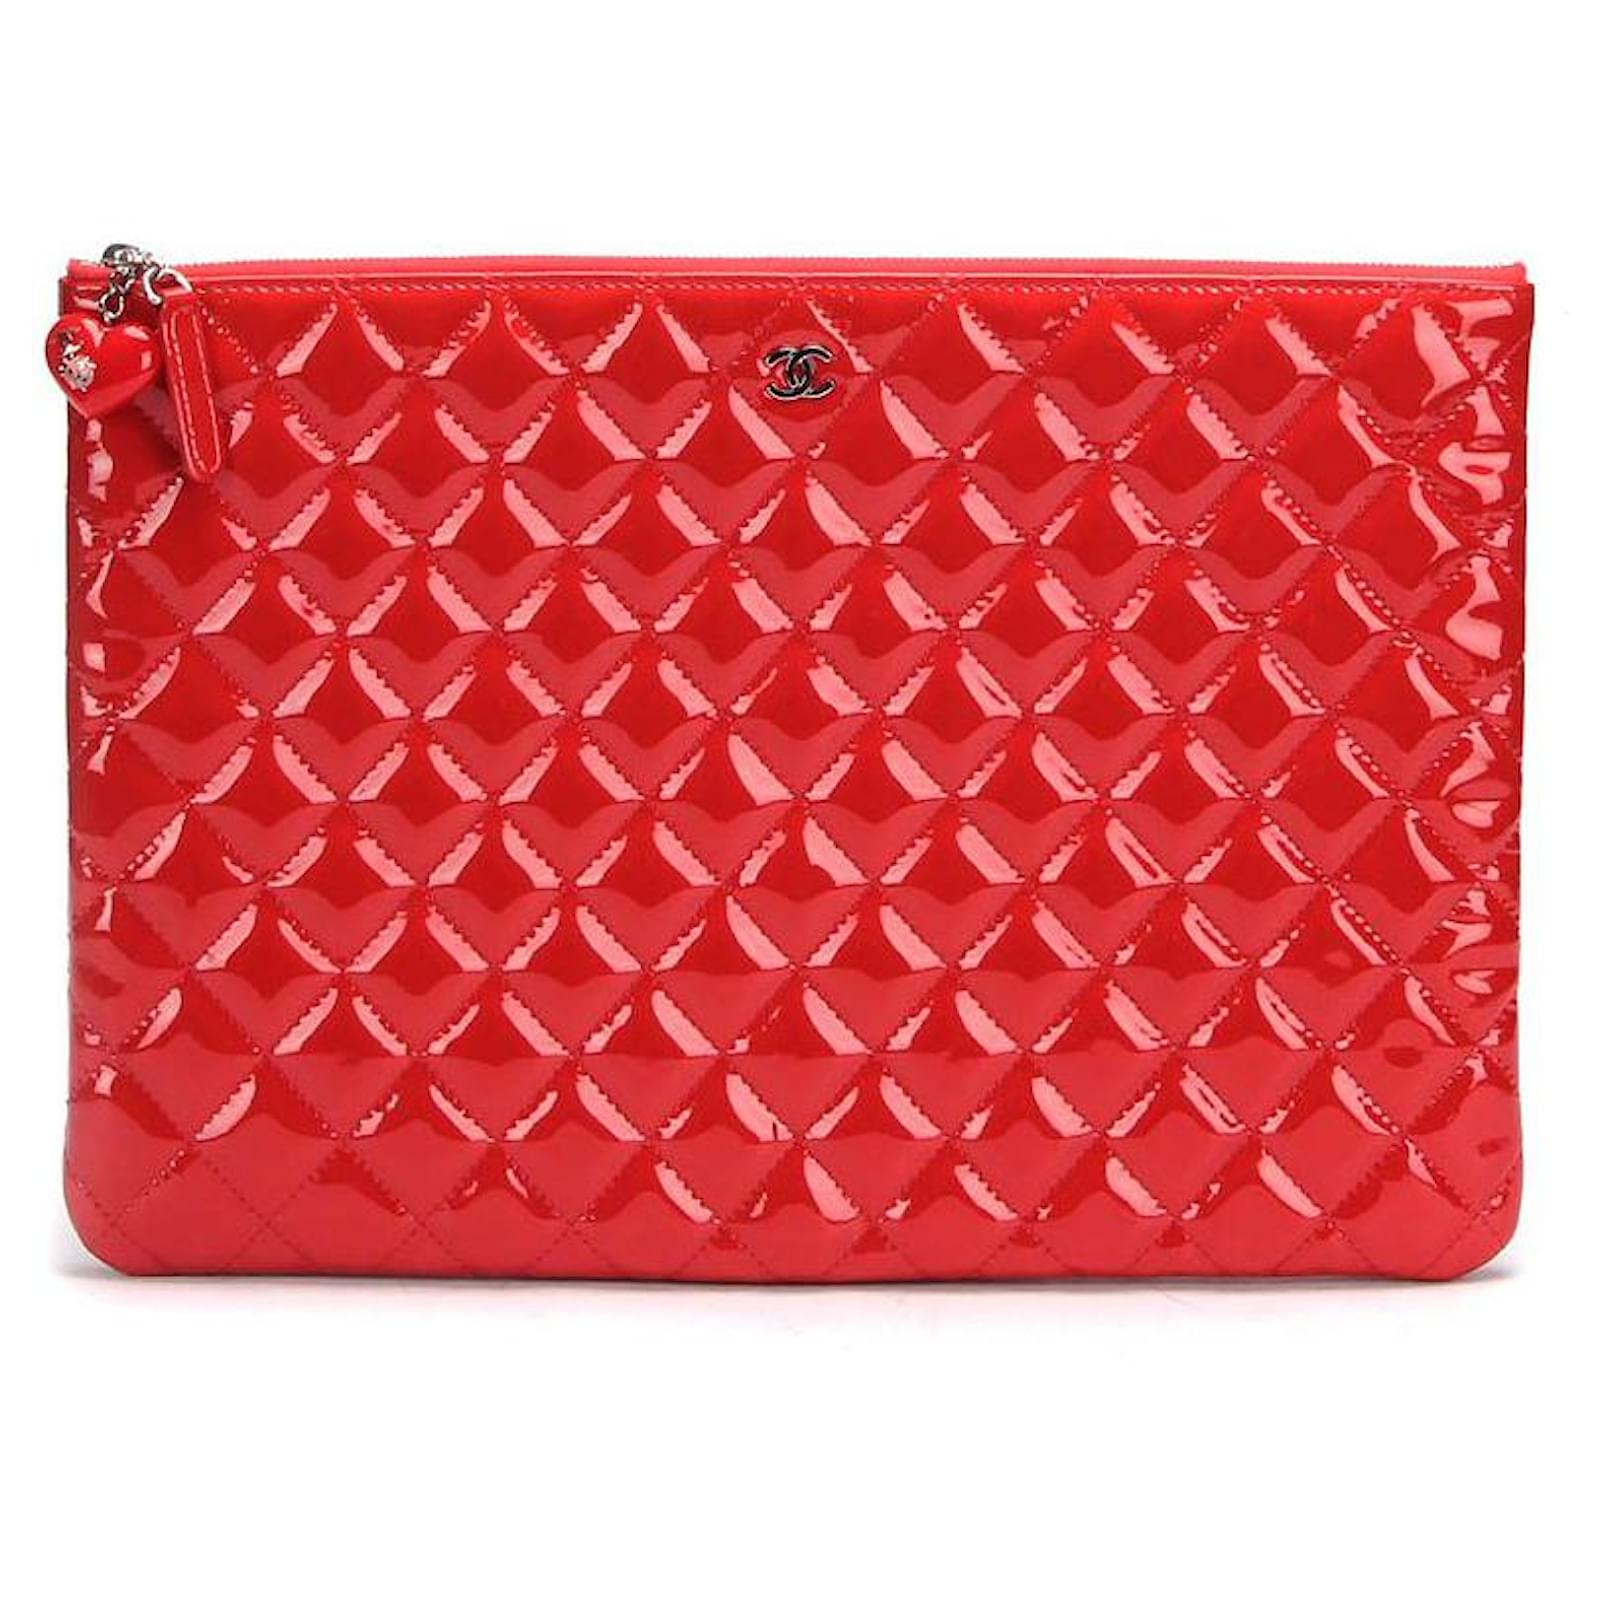 chanel cc matelasse patent leather clutch bag in red patent leather